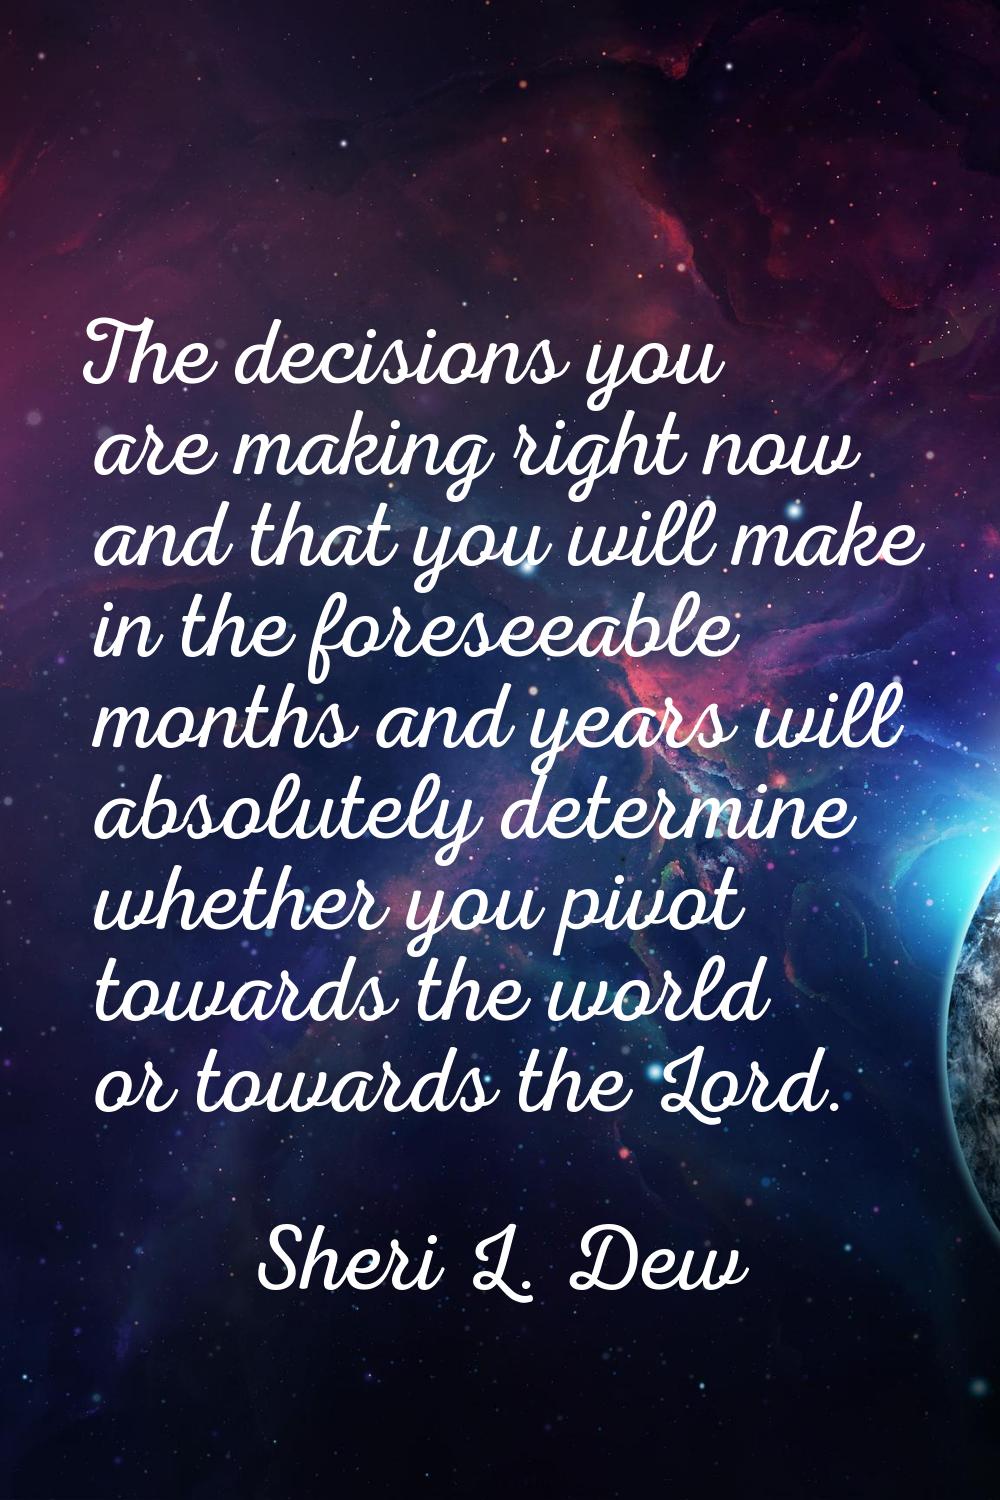 The decisions you are making right now and that you will make in the foreseeable months and years w